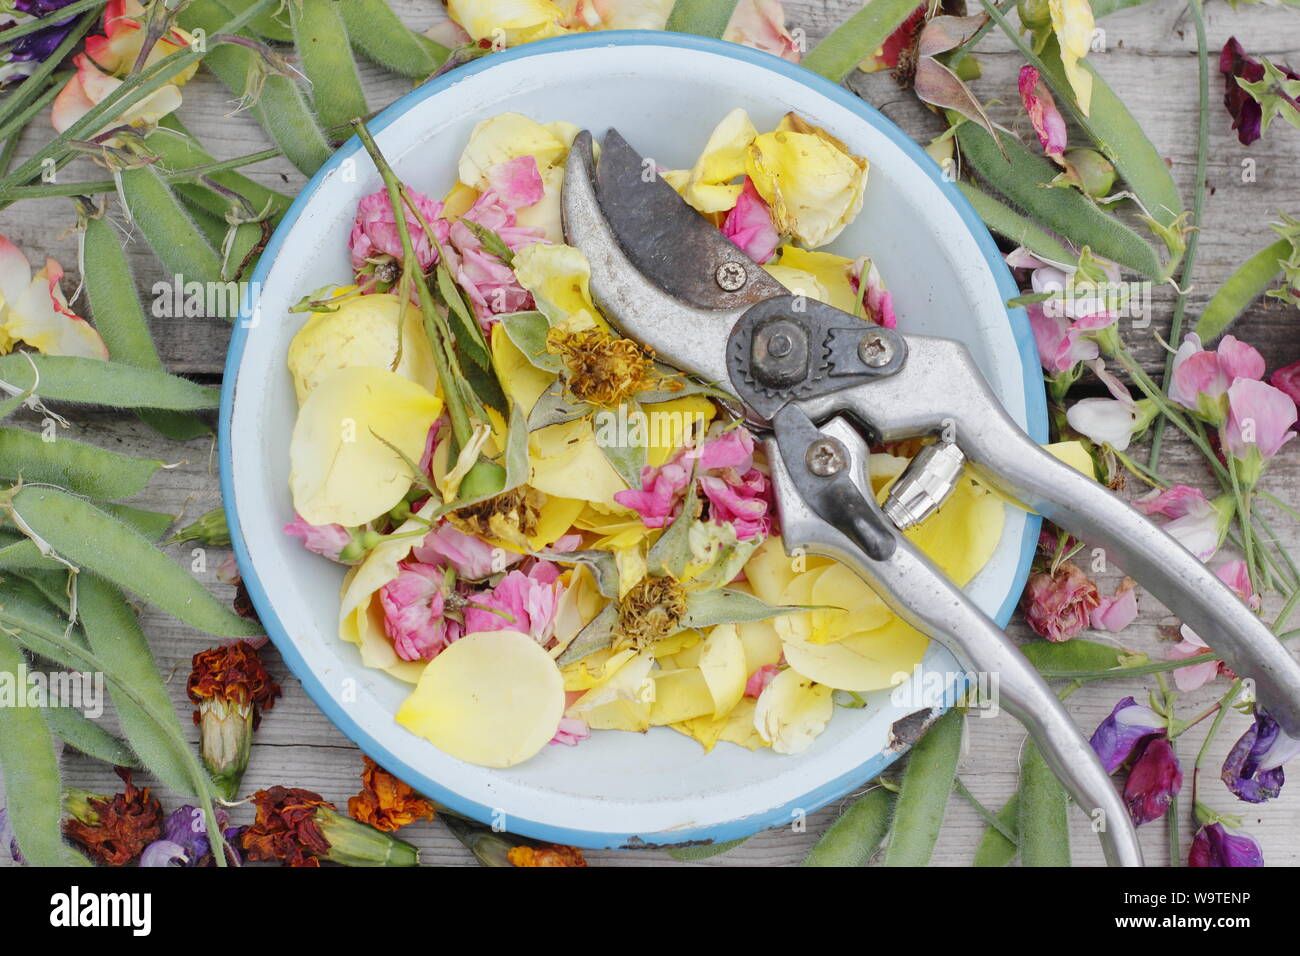 Flower deadheads of sweet peas, roses and marigolds, on blue plate with secateurs in summer. UK Stock Photo